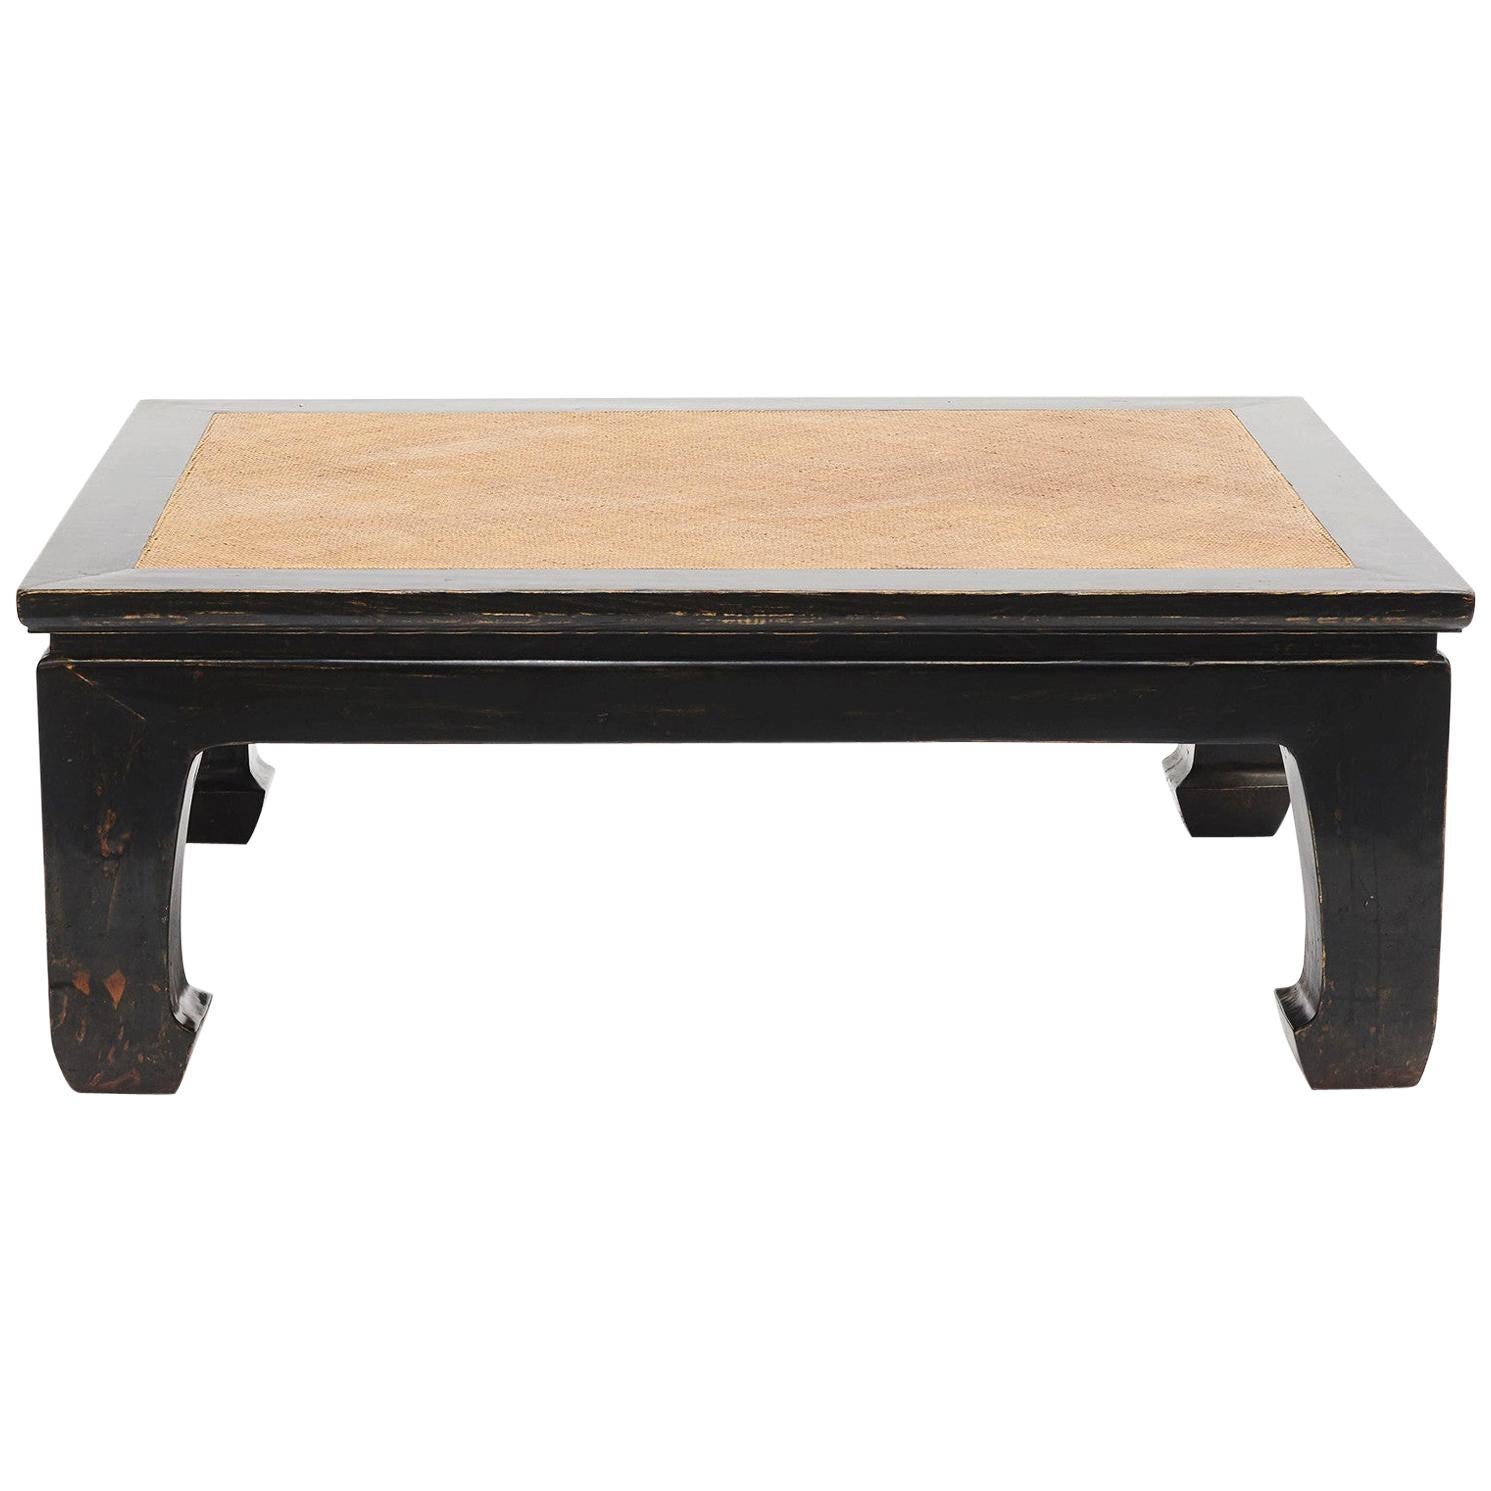 Chinese Black Lacquer Coffee Table with bamboo wicker Inlaid